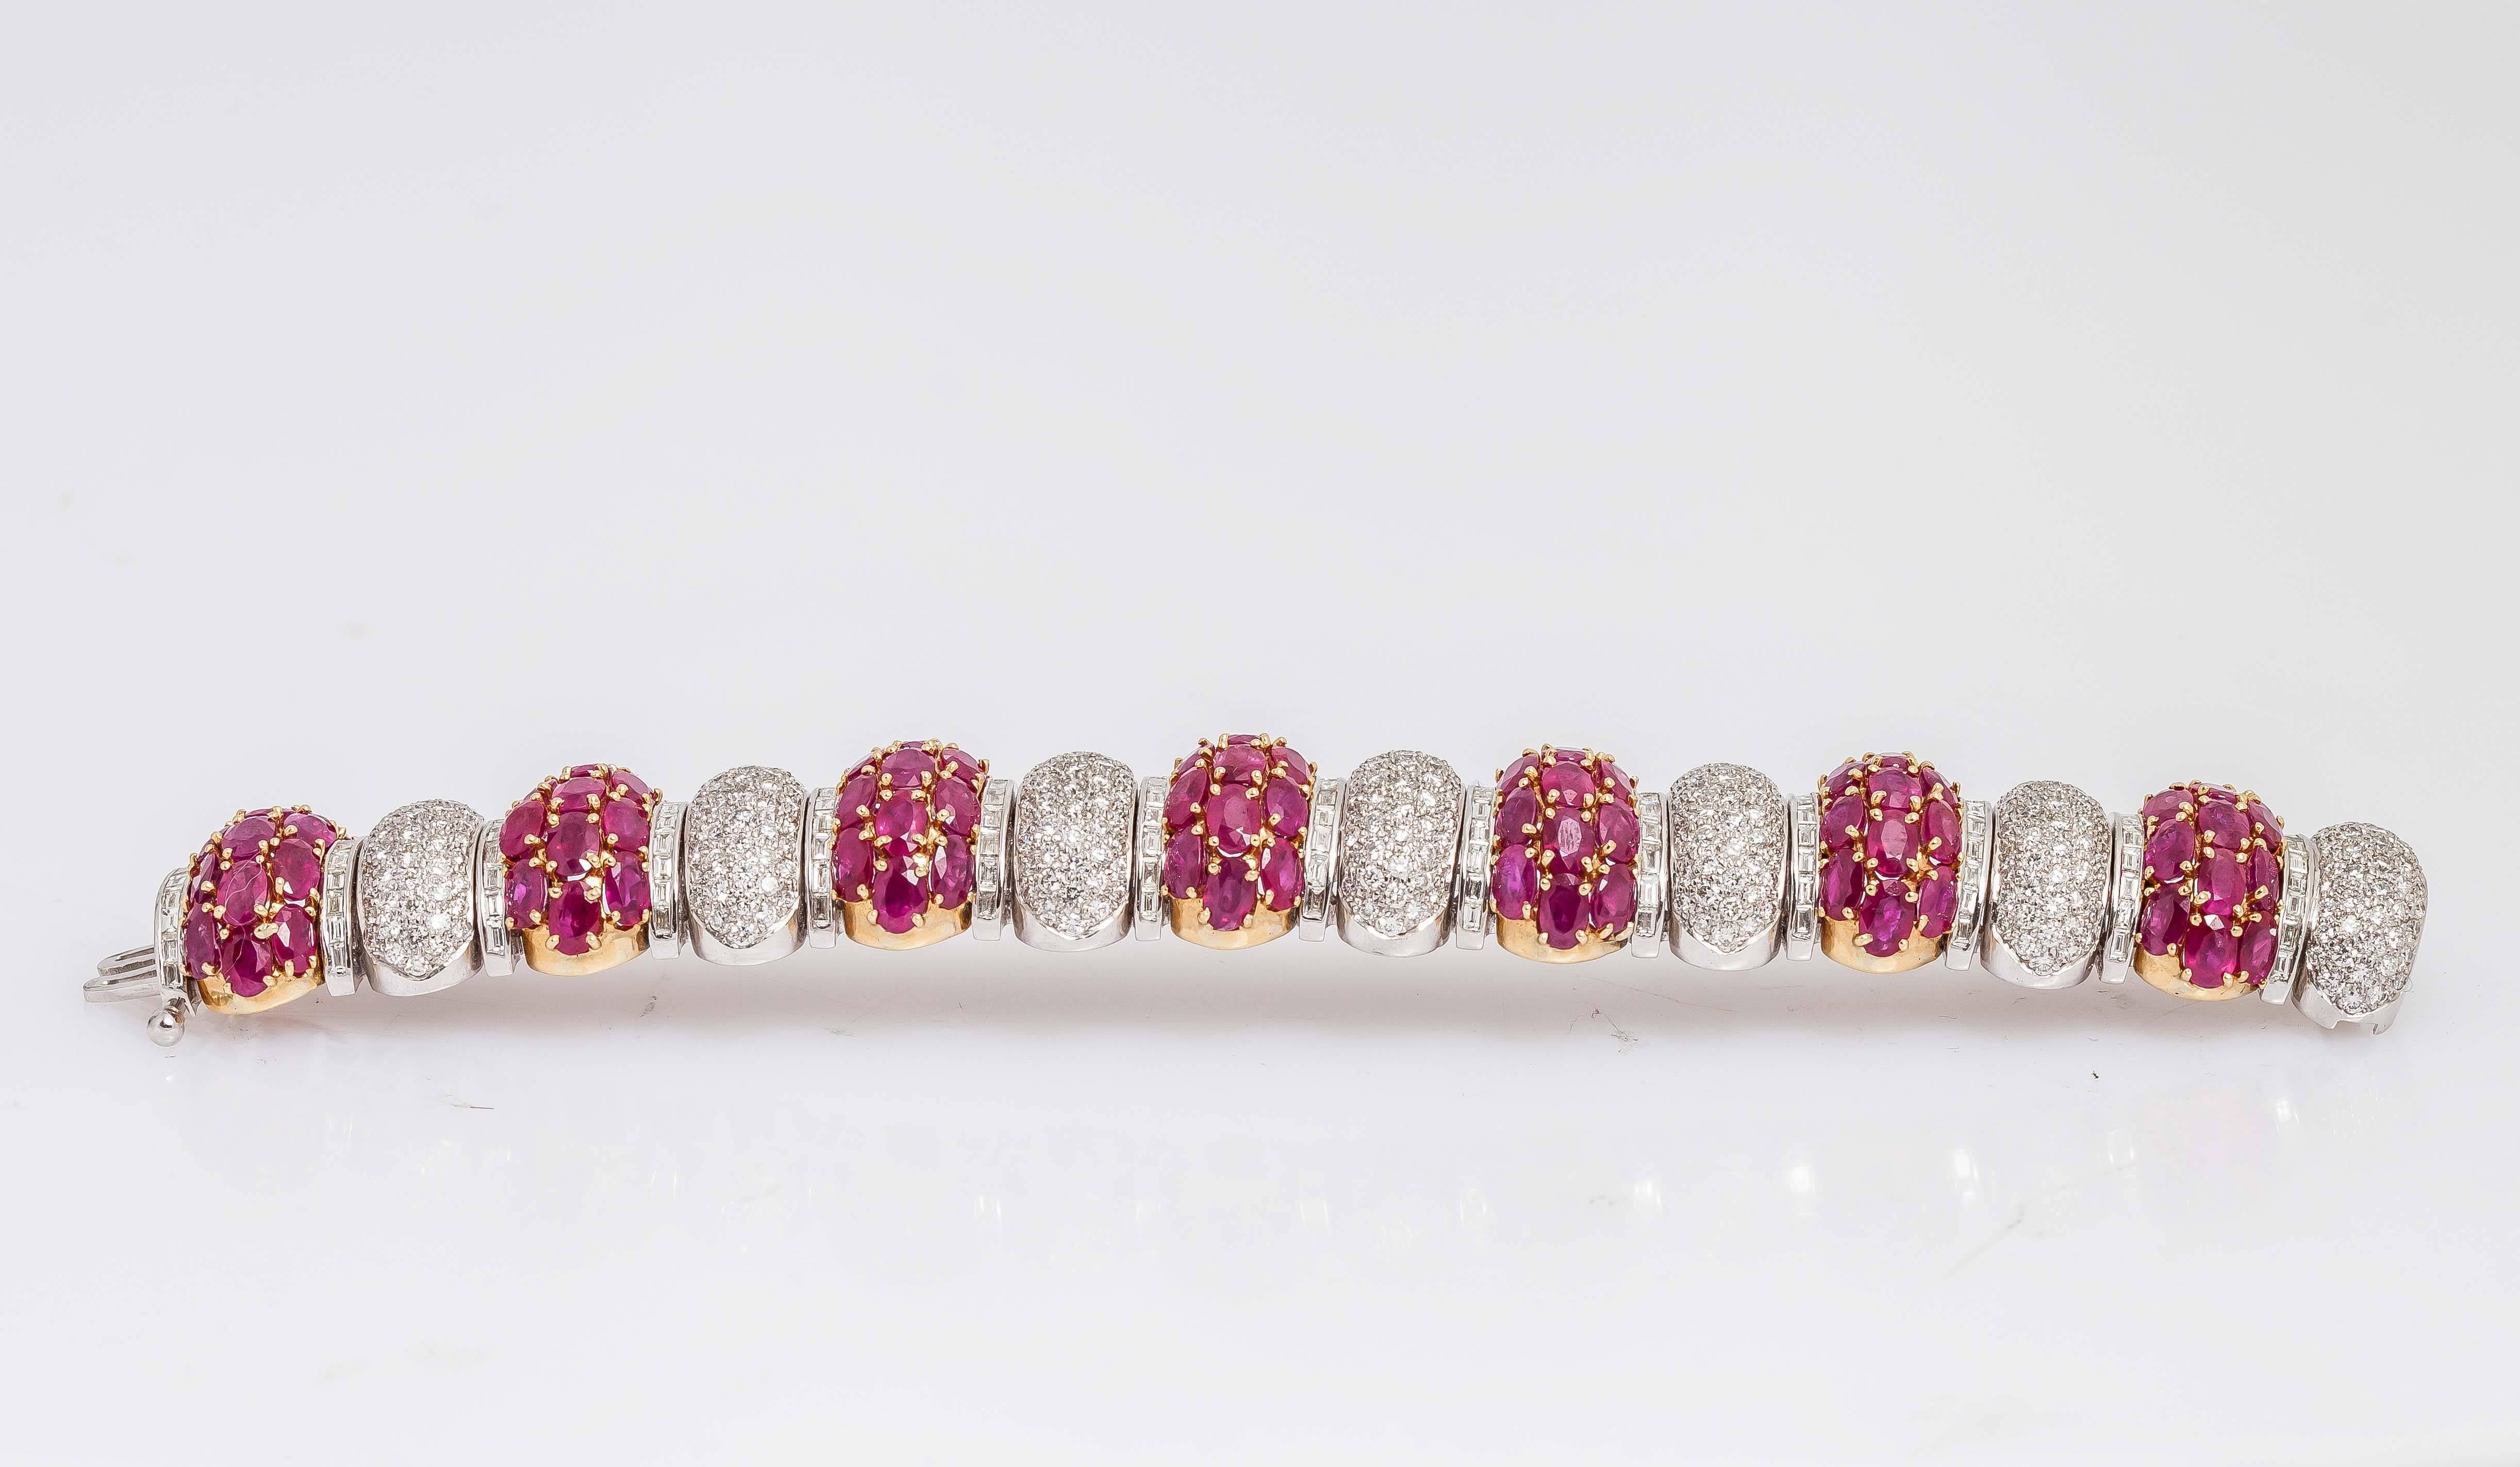 Beautiful bracelet finely crafted in 18k yellow and white gold. It has diamonds that weigh approx. 15.75 carats and rubies weigh approx. 52.39 carats.